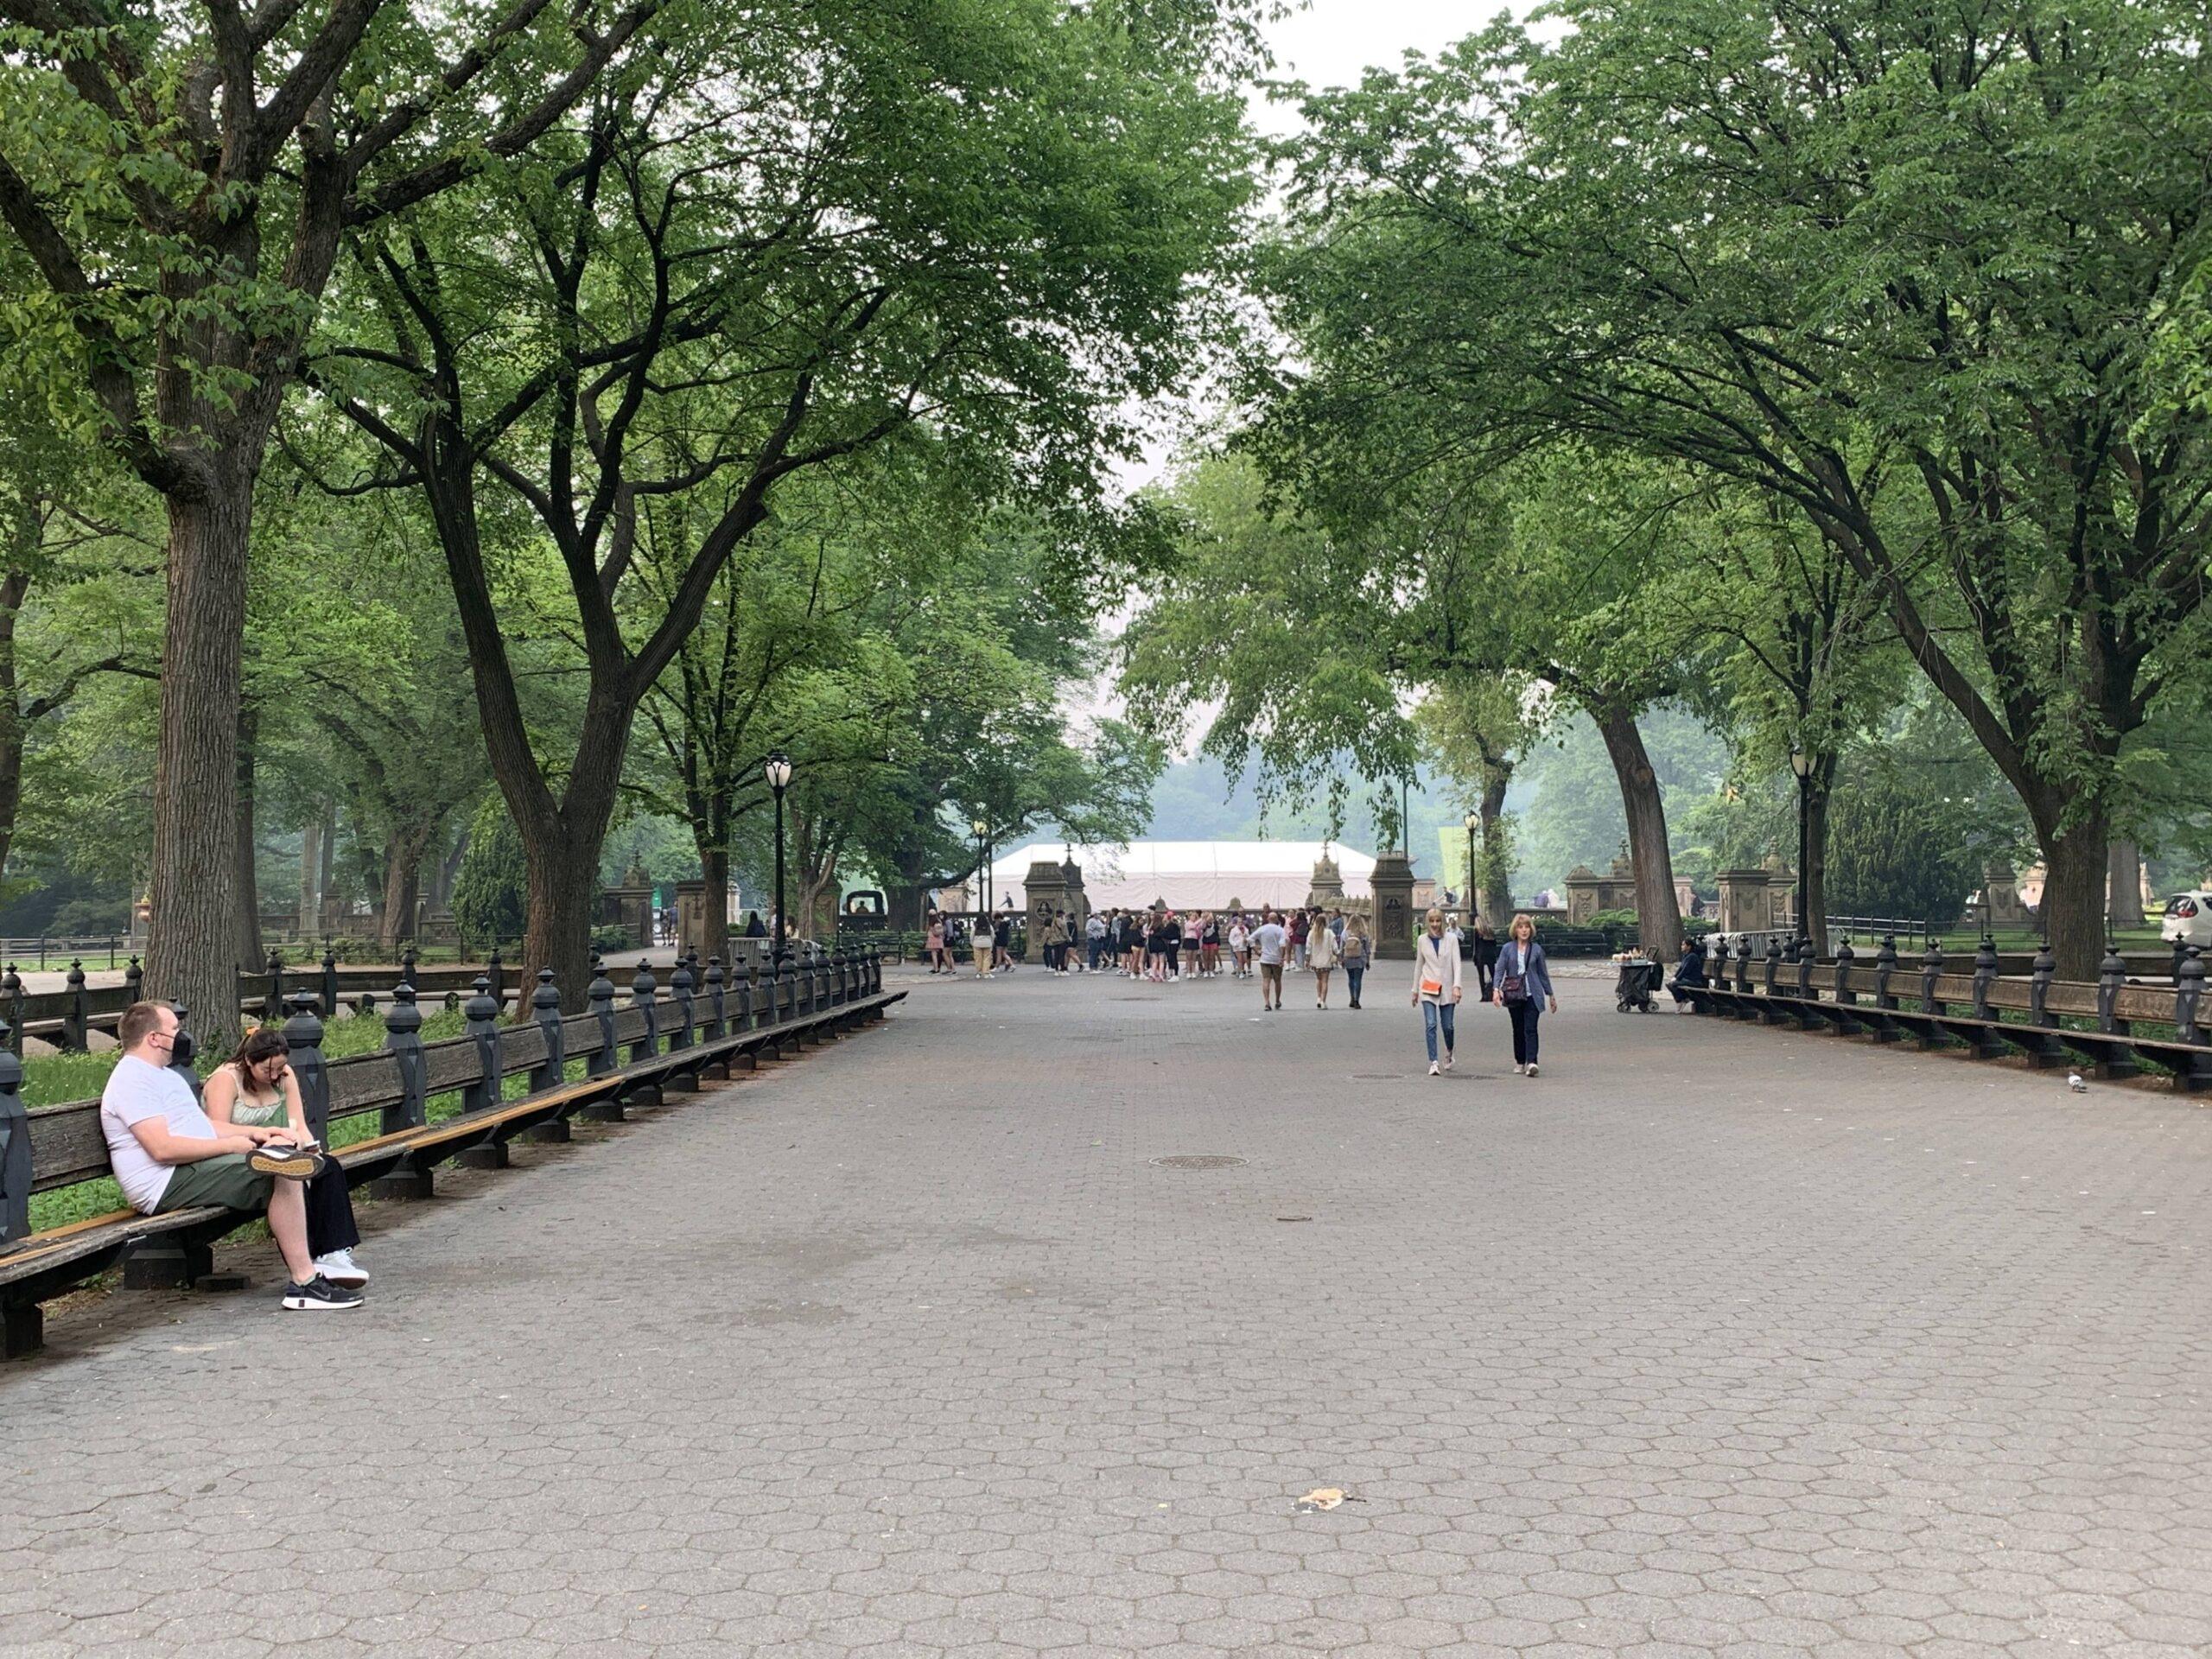 A nearly empty Central Park in New York City